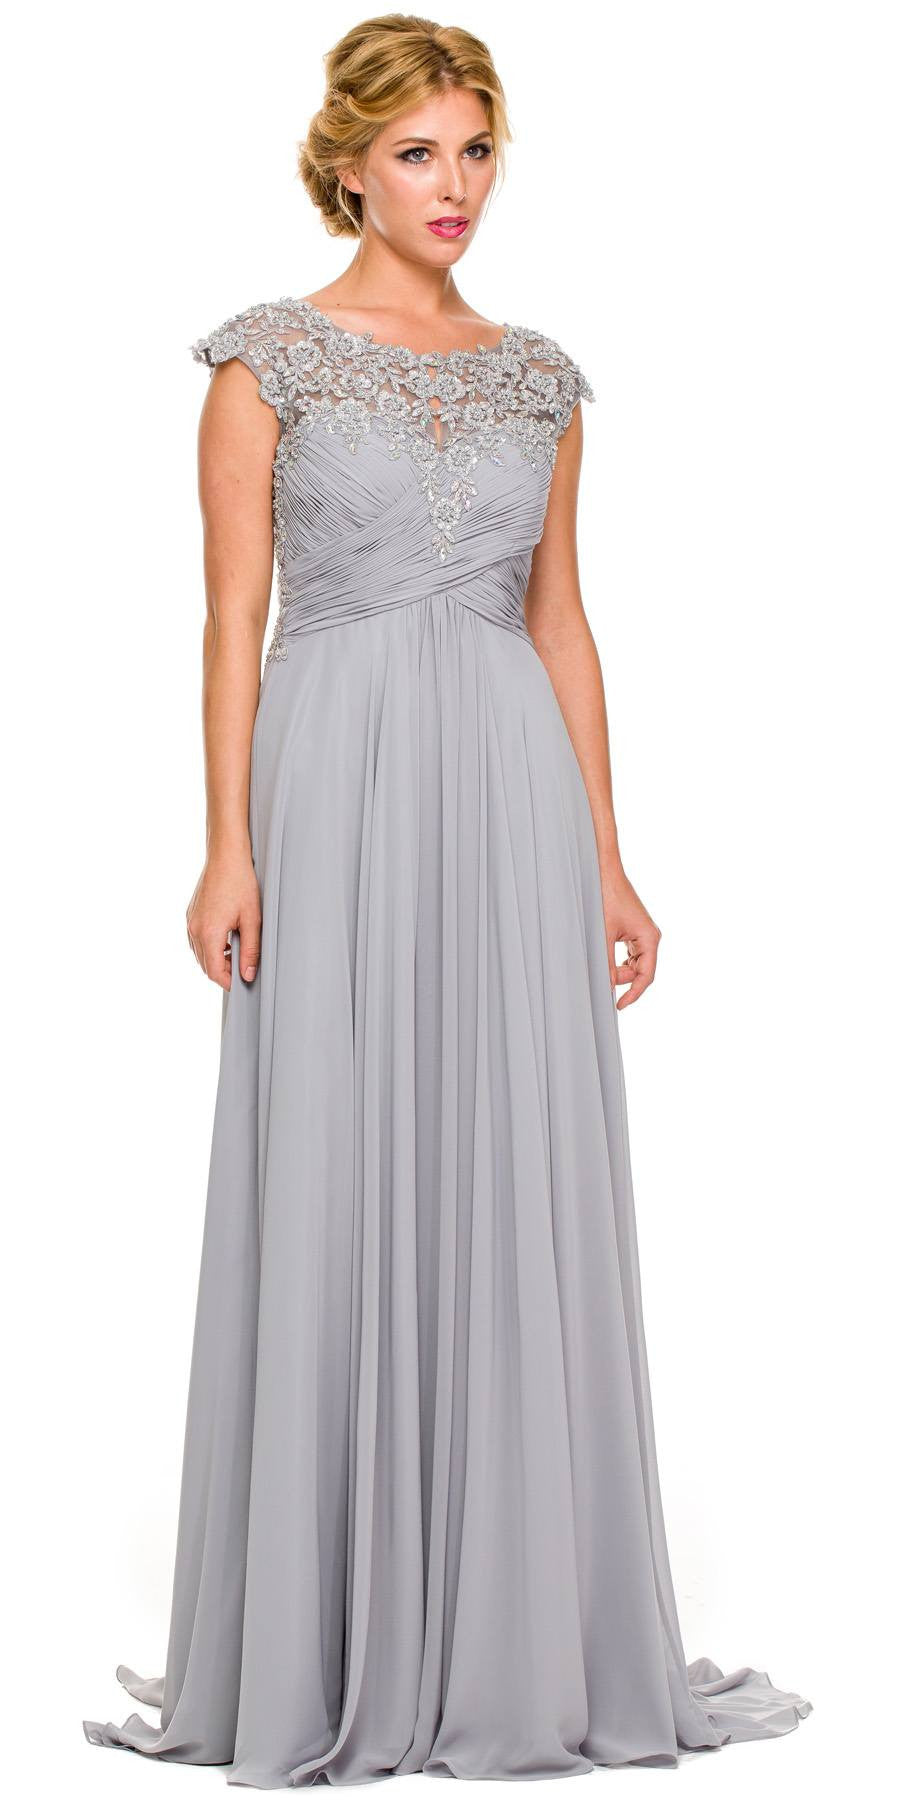 Plus Size Silver Formal Gown Cap Sleeve Empire Waist Full Length